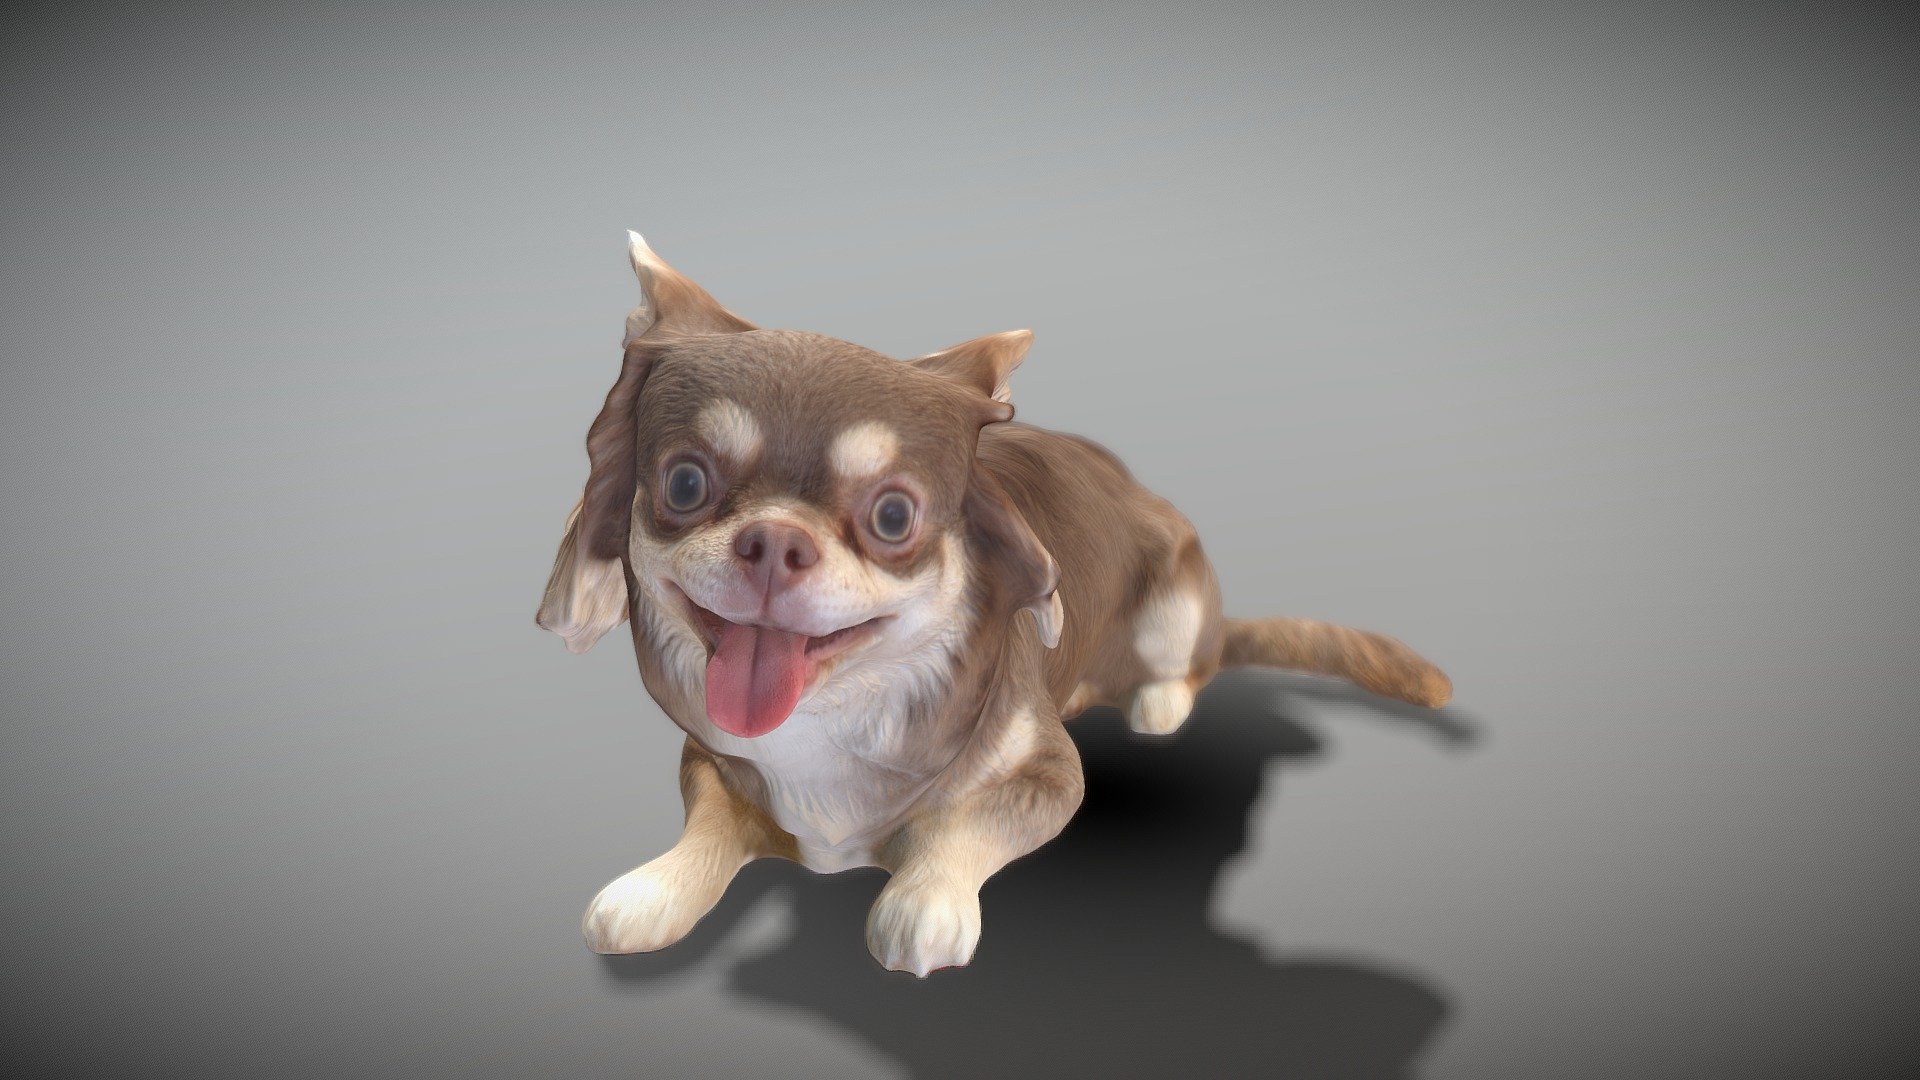 This is a true sized and highly detailed model of a young charming Chihuahua dog. It will add life and coziness to any architectural visualisation of houses, playgrounds, parques, urban landscapes, etc. This model is suitable for game engine integration, VR/AR content, etc.

Technical specifications:




digital double 3d scan model

150k &amp; 30k triangles | double triangulated

high-poly model (.ztl tool with 5 subdivisions) clean and retopologized automatically via ZRemesher

sufficiently clean

PBR textures 8K resolution: Diffuse, Normal, Specular maps

non-overlapping UV map

no extra plugins are required for this model

Download package includes a Cinema 4D project file with Redshift shader, OBJ, FBX, STL files, which are applicable for 3ds Max, Maya, Unreal Engine, Unity, Blender, etc. All the textures you will find in the “Tex” folder, included into the main archive.

3D EVERYTHING

Stand with Ukraine! - Chihuahua dog lying down 36 - Buy Royalty Free 3D model by deep3dstudio 3d model